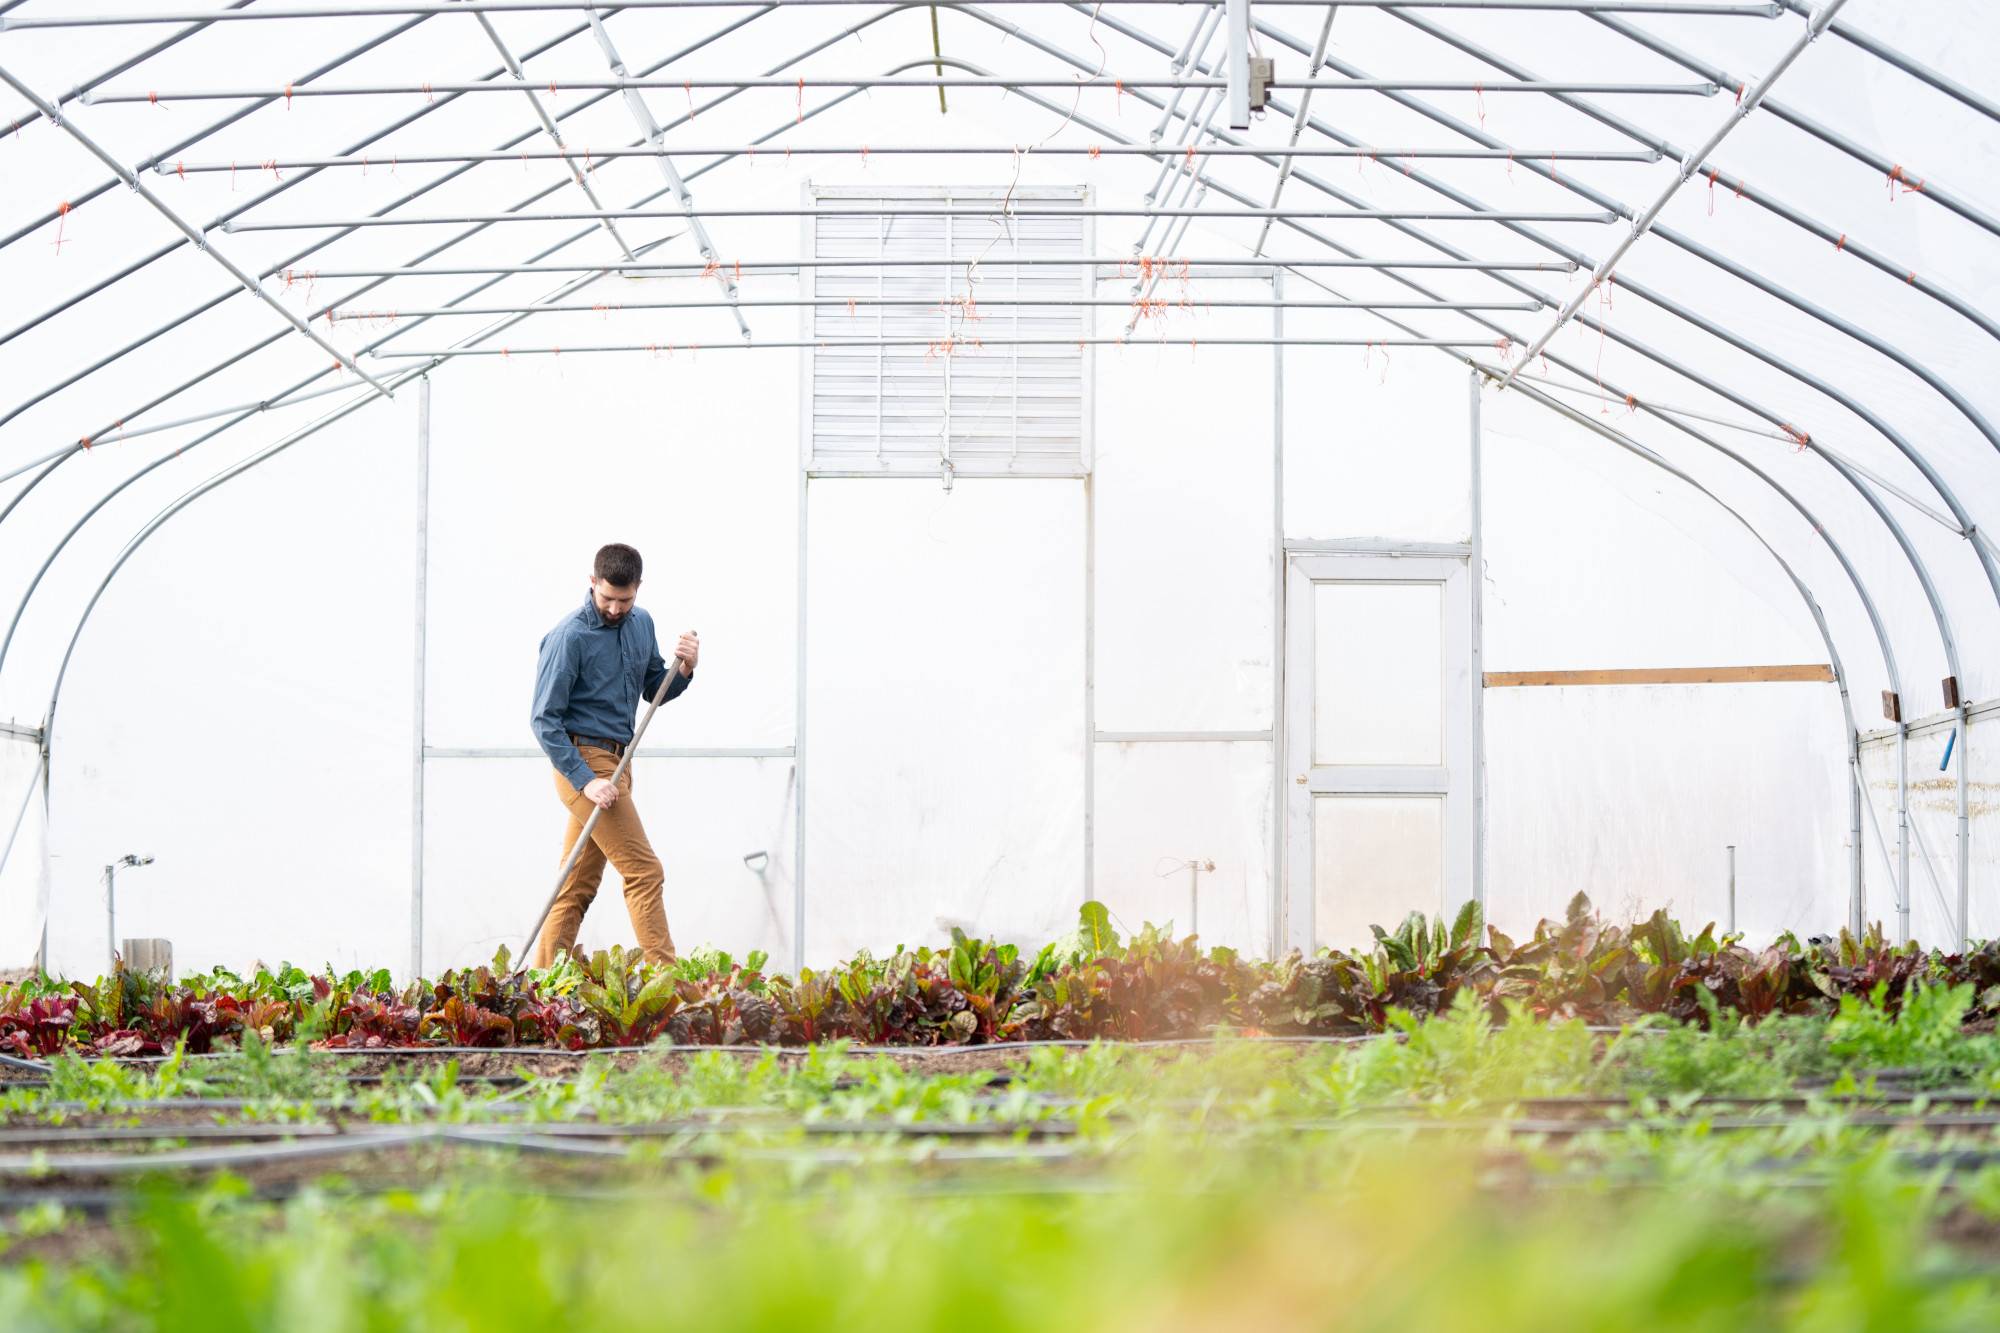 Former farm manager Youssef Darwich tends to the plants in a hoop house at the Sustainable Agriculture Project